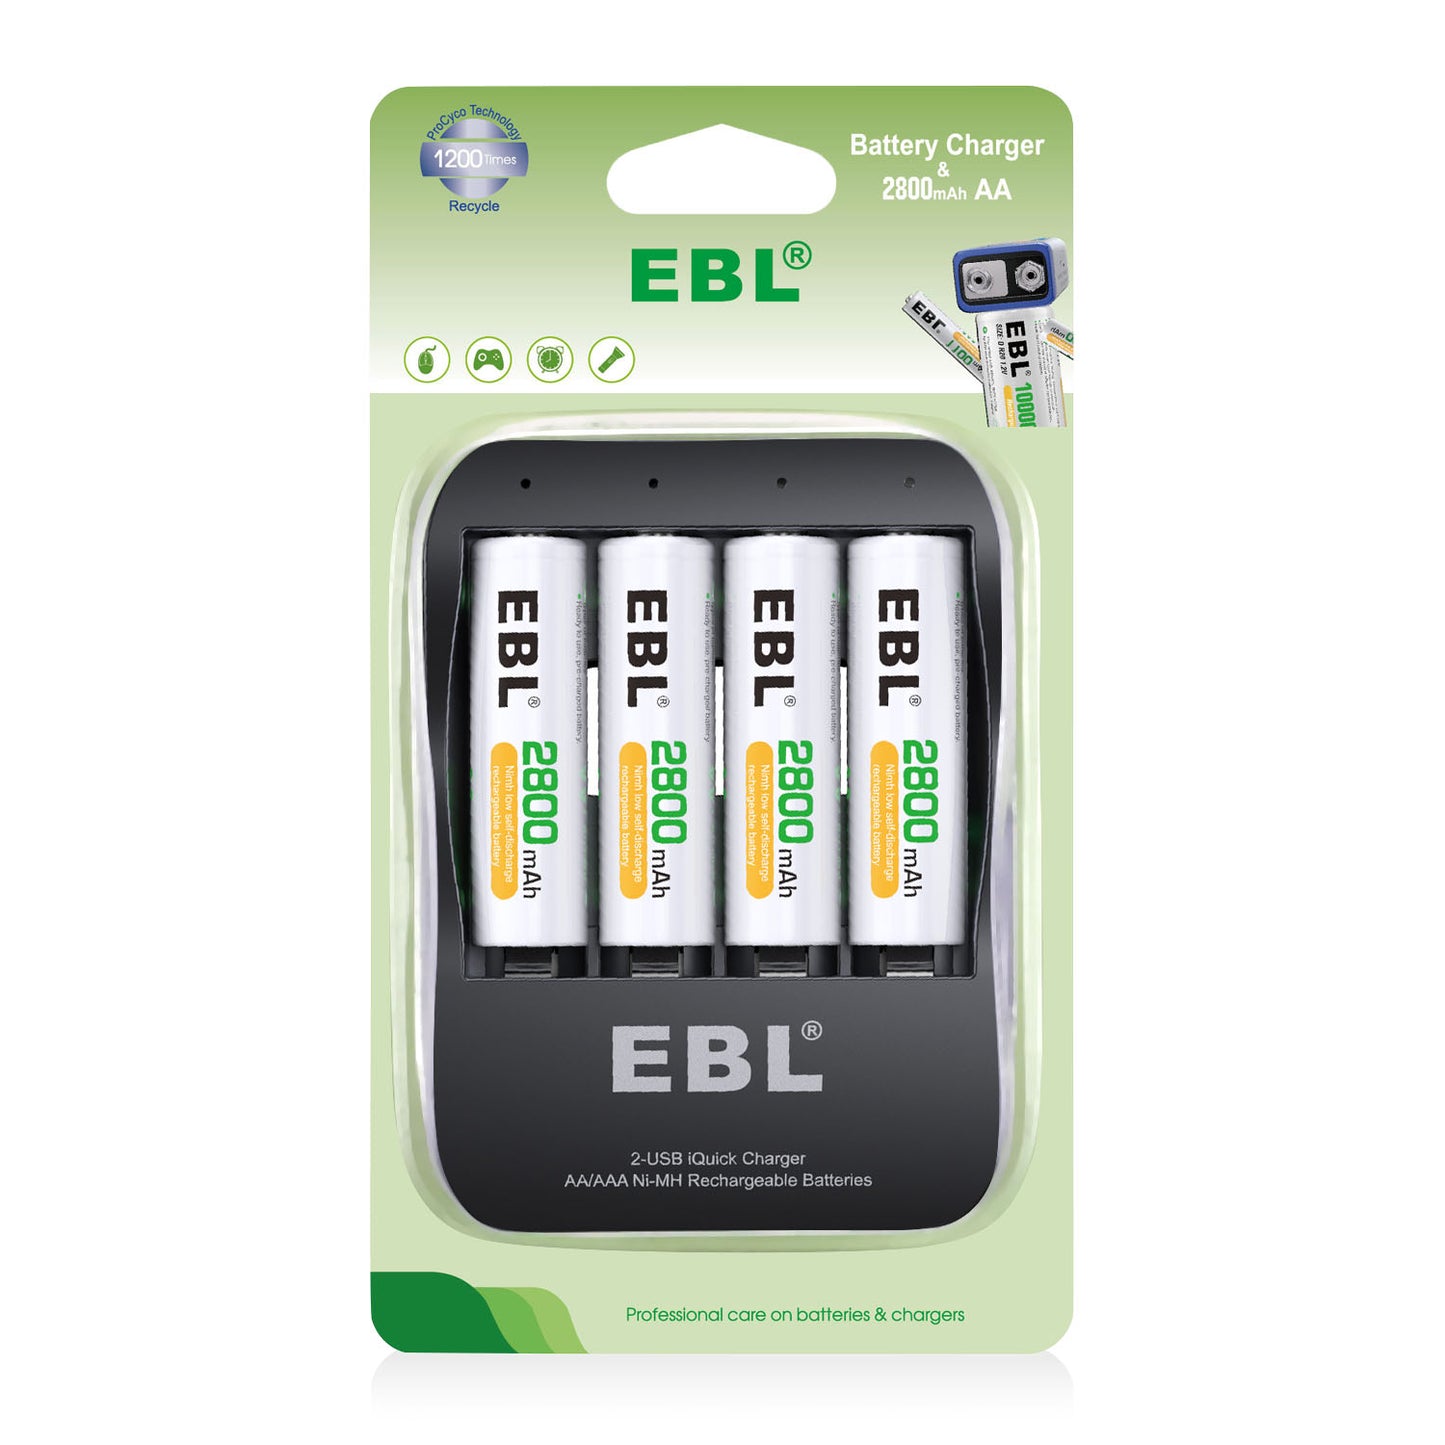 EBL EB-P62018112 1.2V AA 2800mAh NiMH Nickel Metal Hydride Rechargeable Batteries (Pack of 4) with Fast Charging AA/AAA 2-Hour USB-C / Micro USB Quick Battery Charger